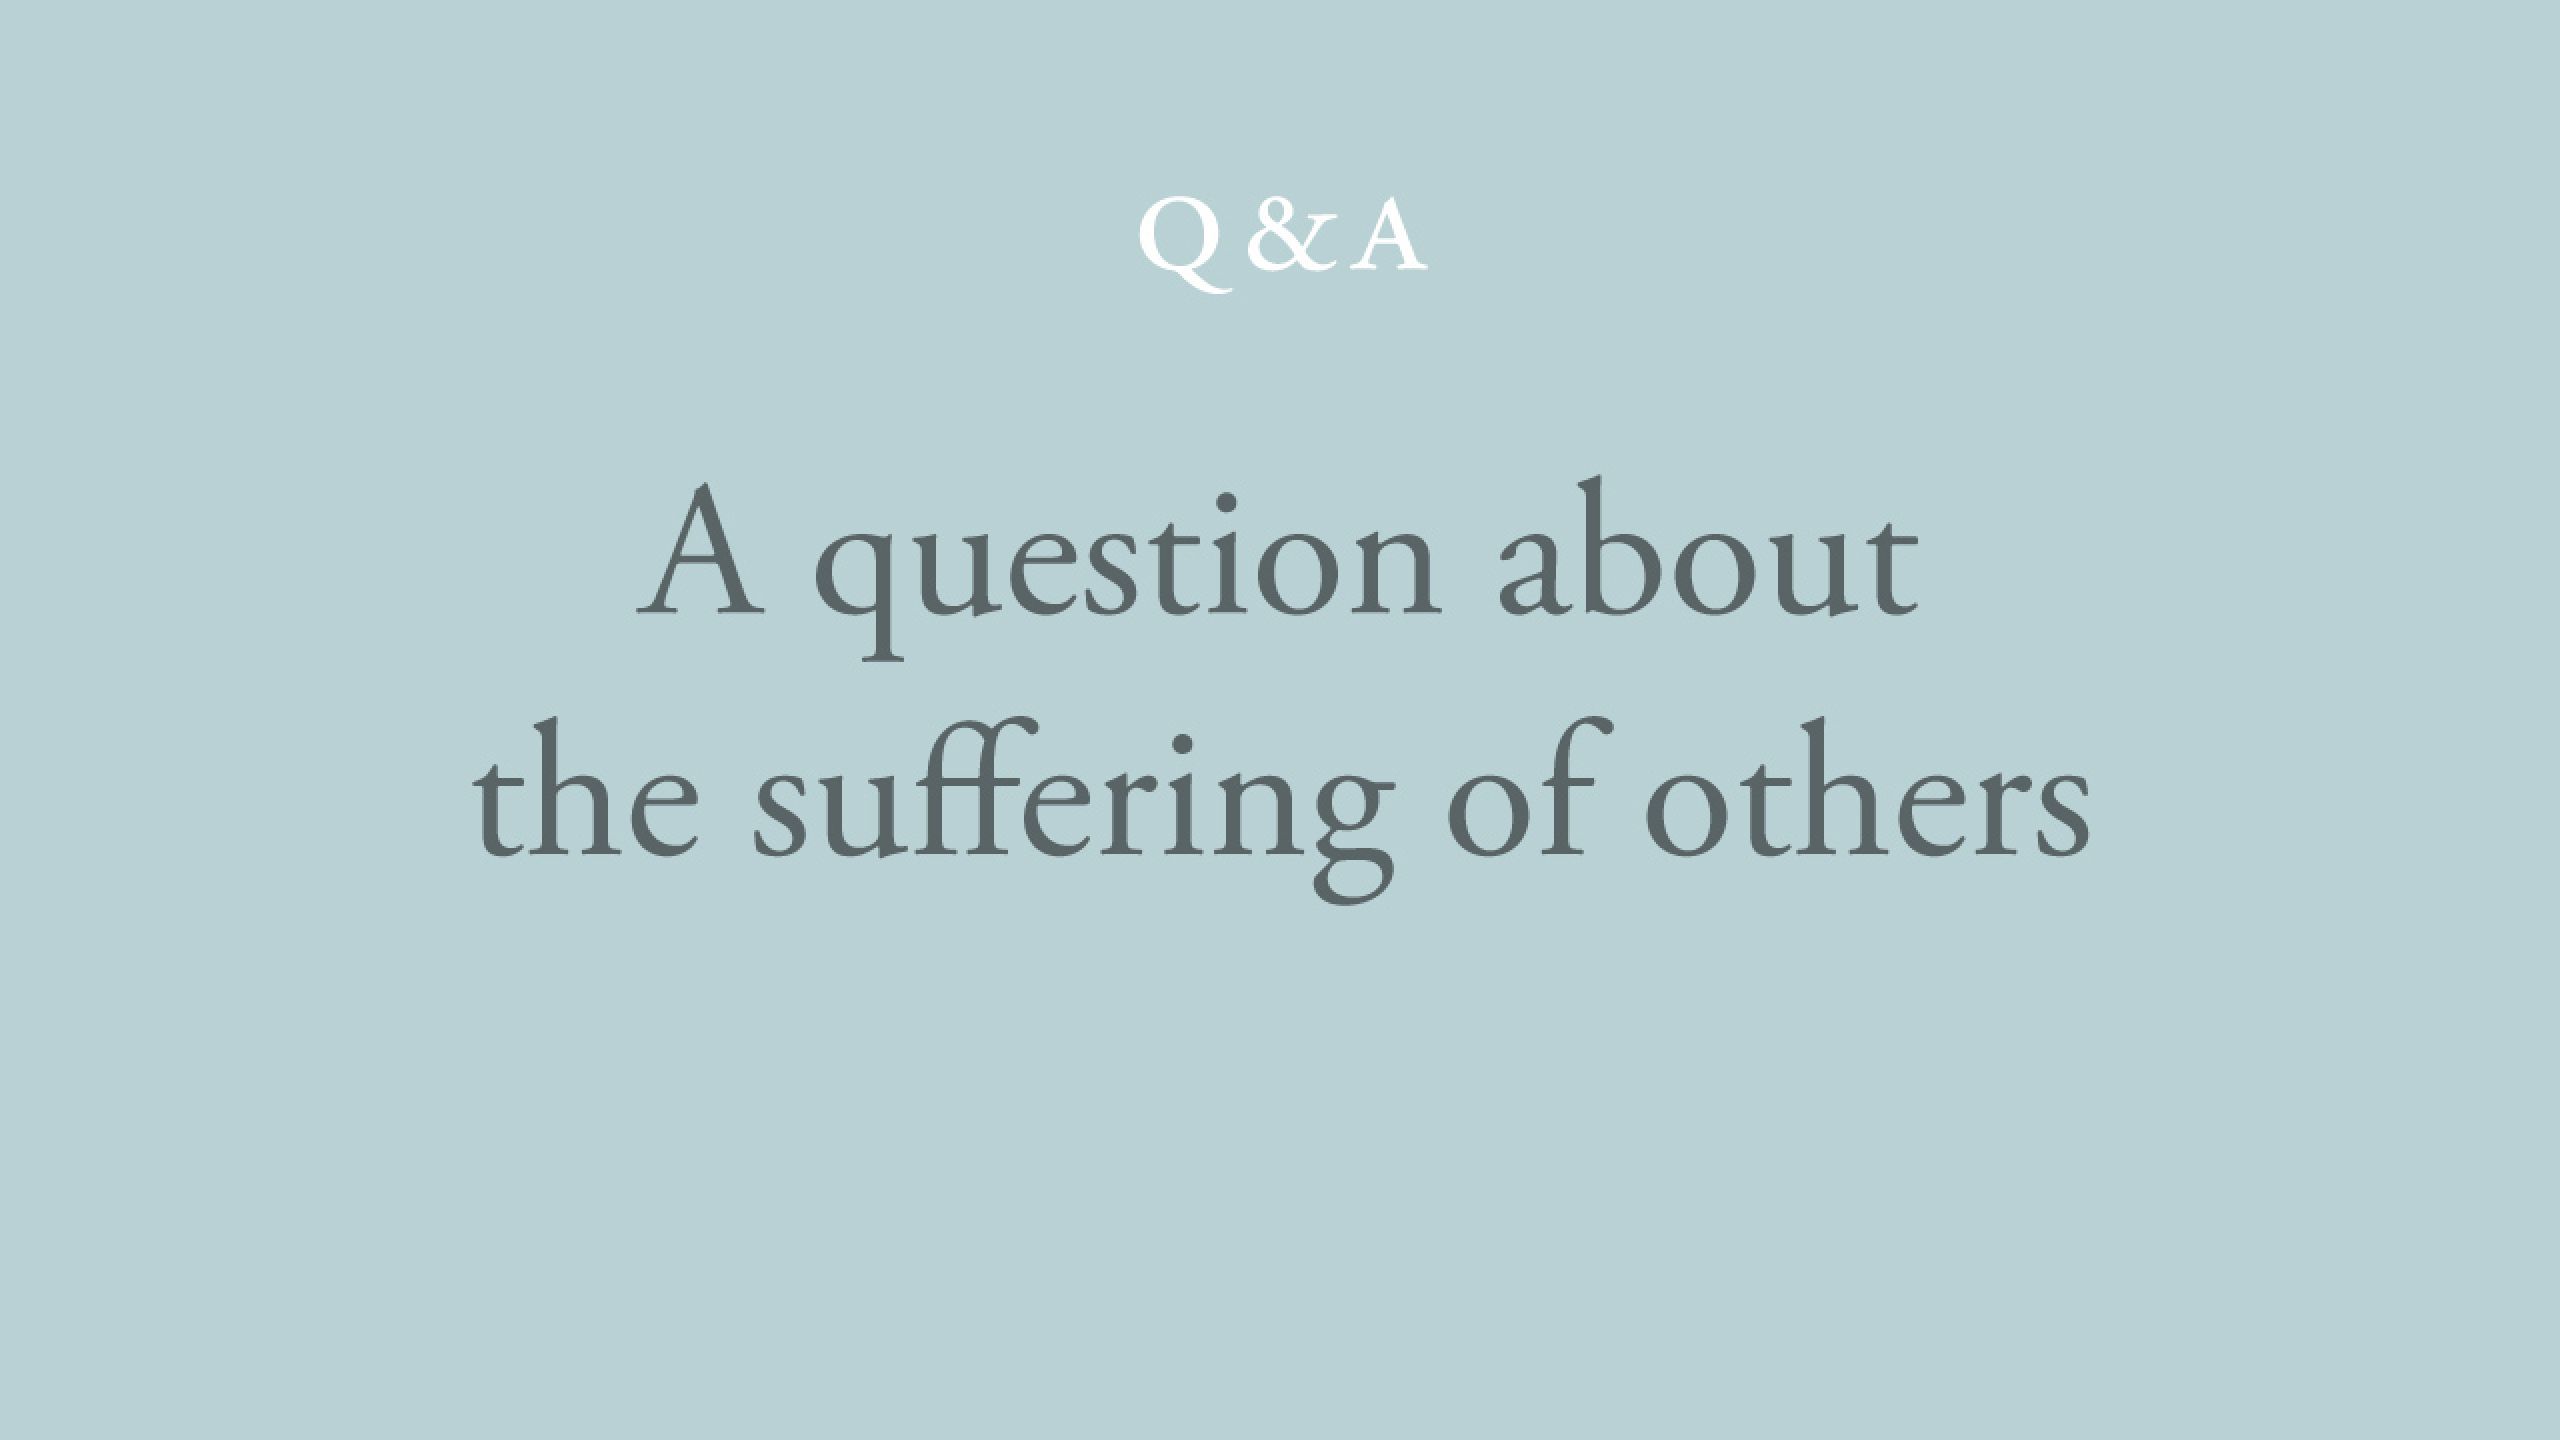 What is the best way to face the suffering of others?